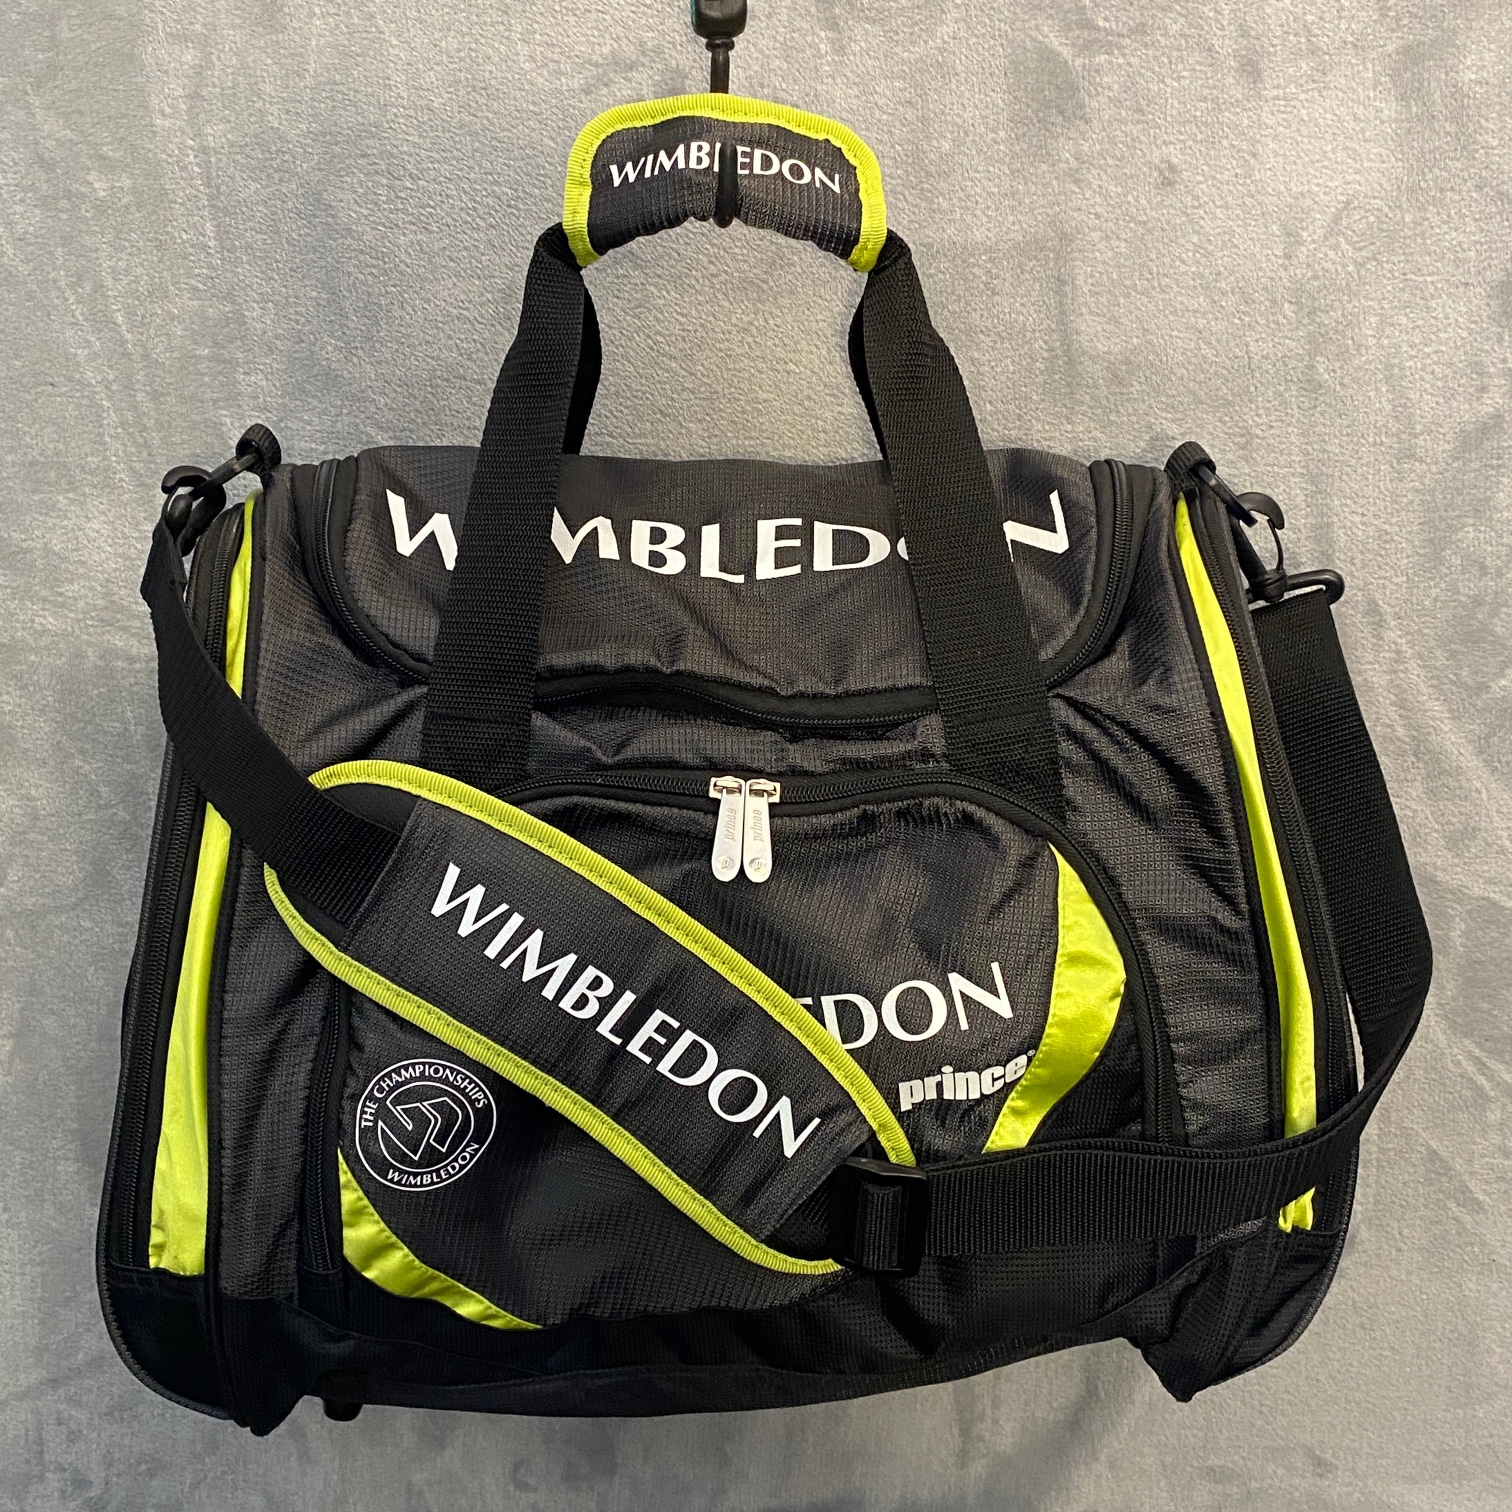 Wimbledon The Championships Official Black Tennis Sports Duffle Bag by Prince